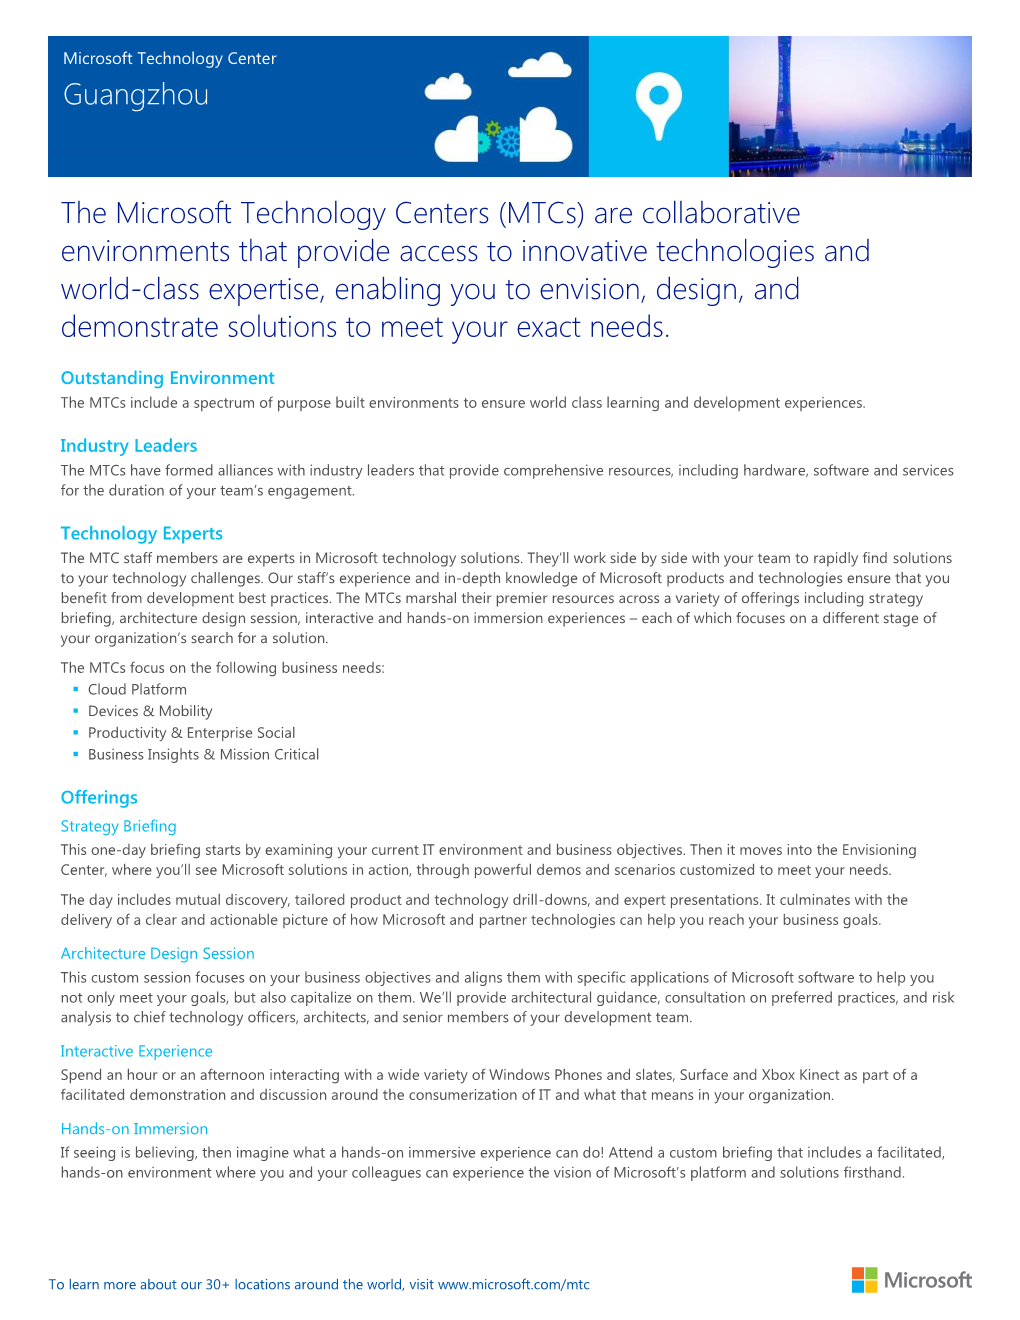 The Microsoft Technology Centers (Mtcs) Are Collaborative